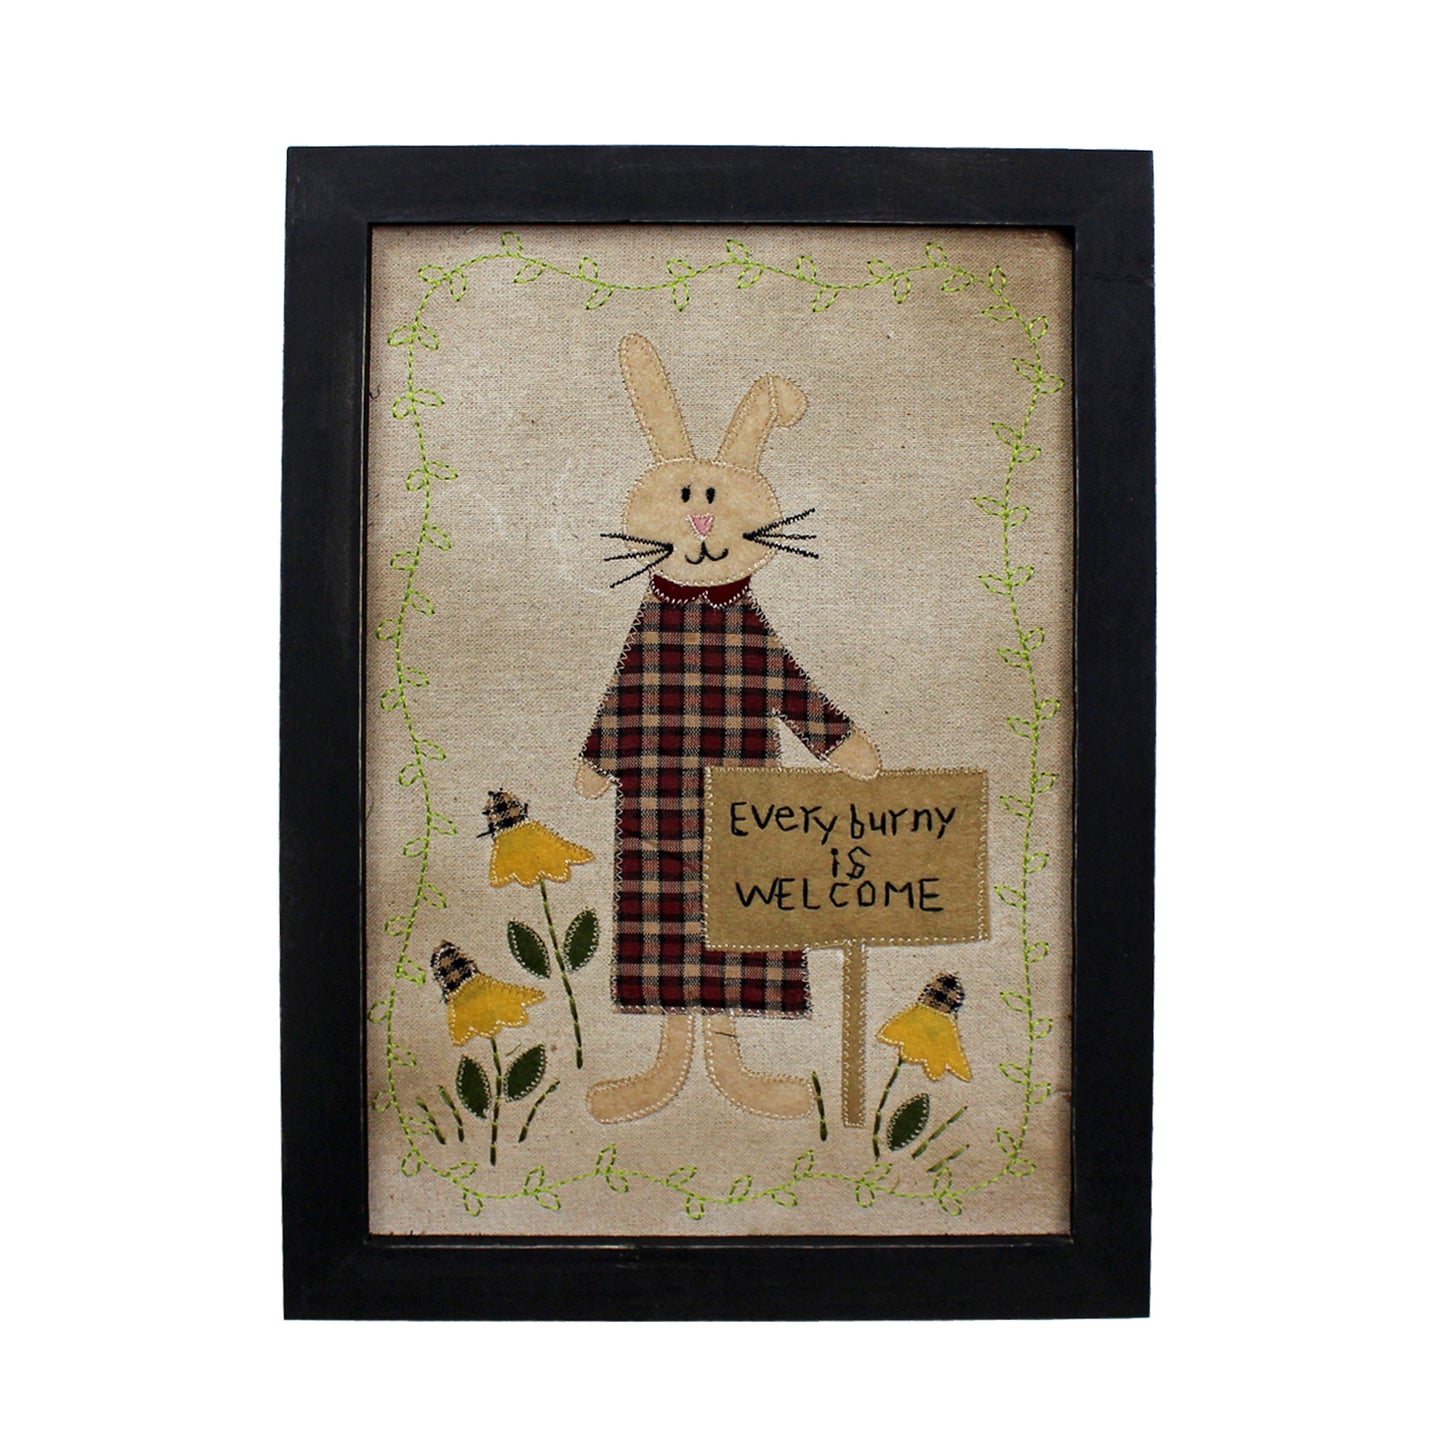 CVHOMEDECO. Primitives Vintage Every burny is Welcome Stitchery Frame Wall Mounted Hanging Decor Art, 9.5 x 13.5 Inch